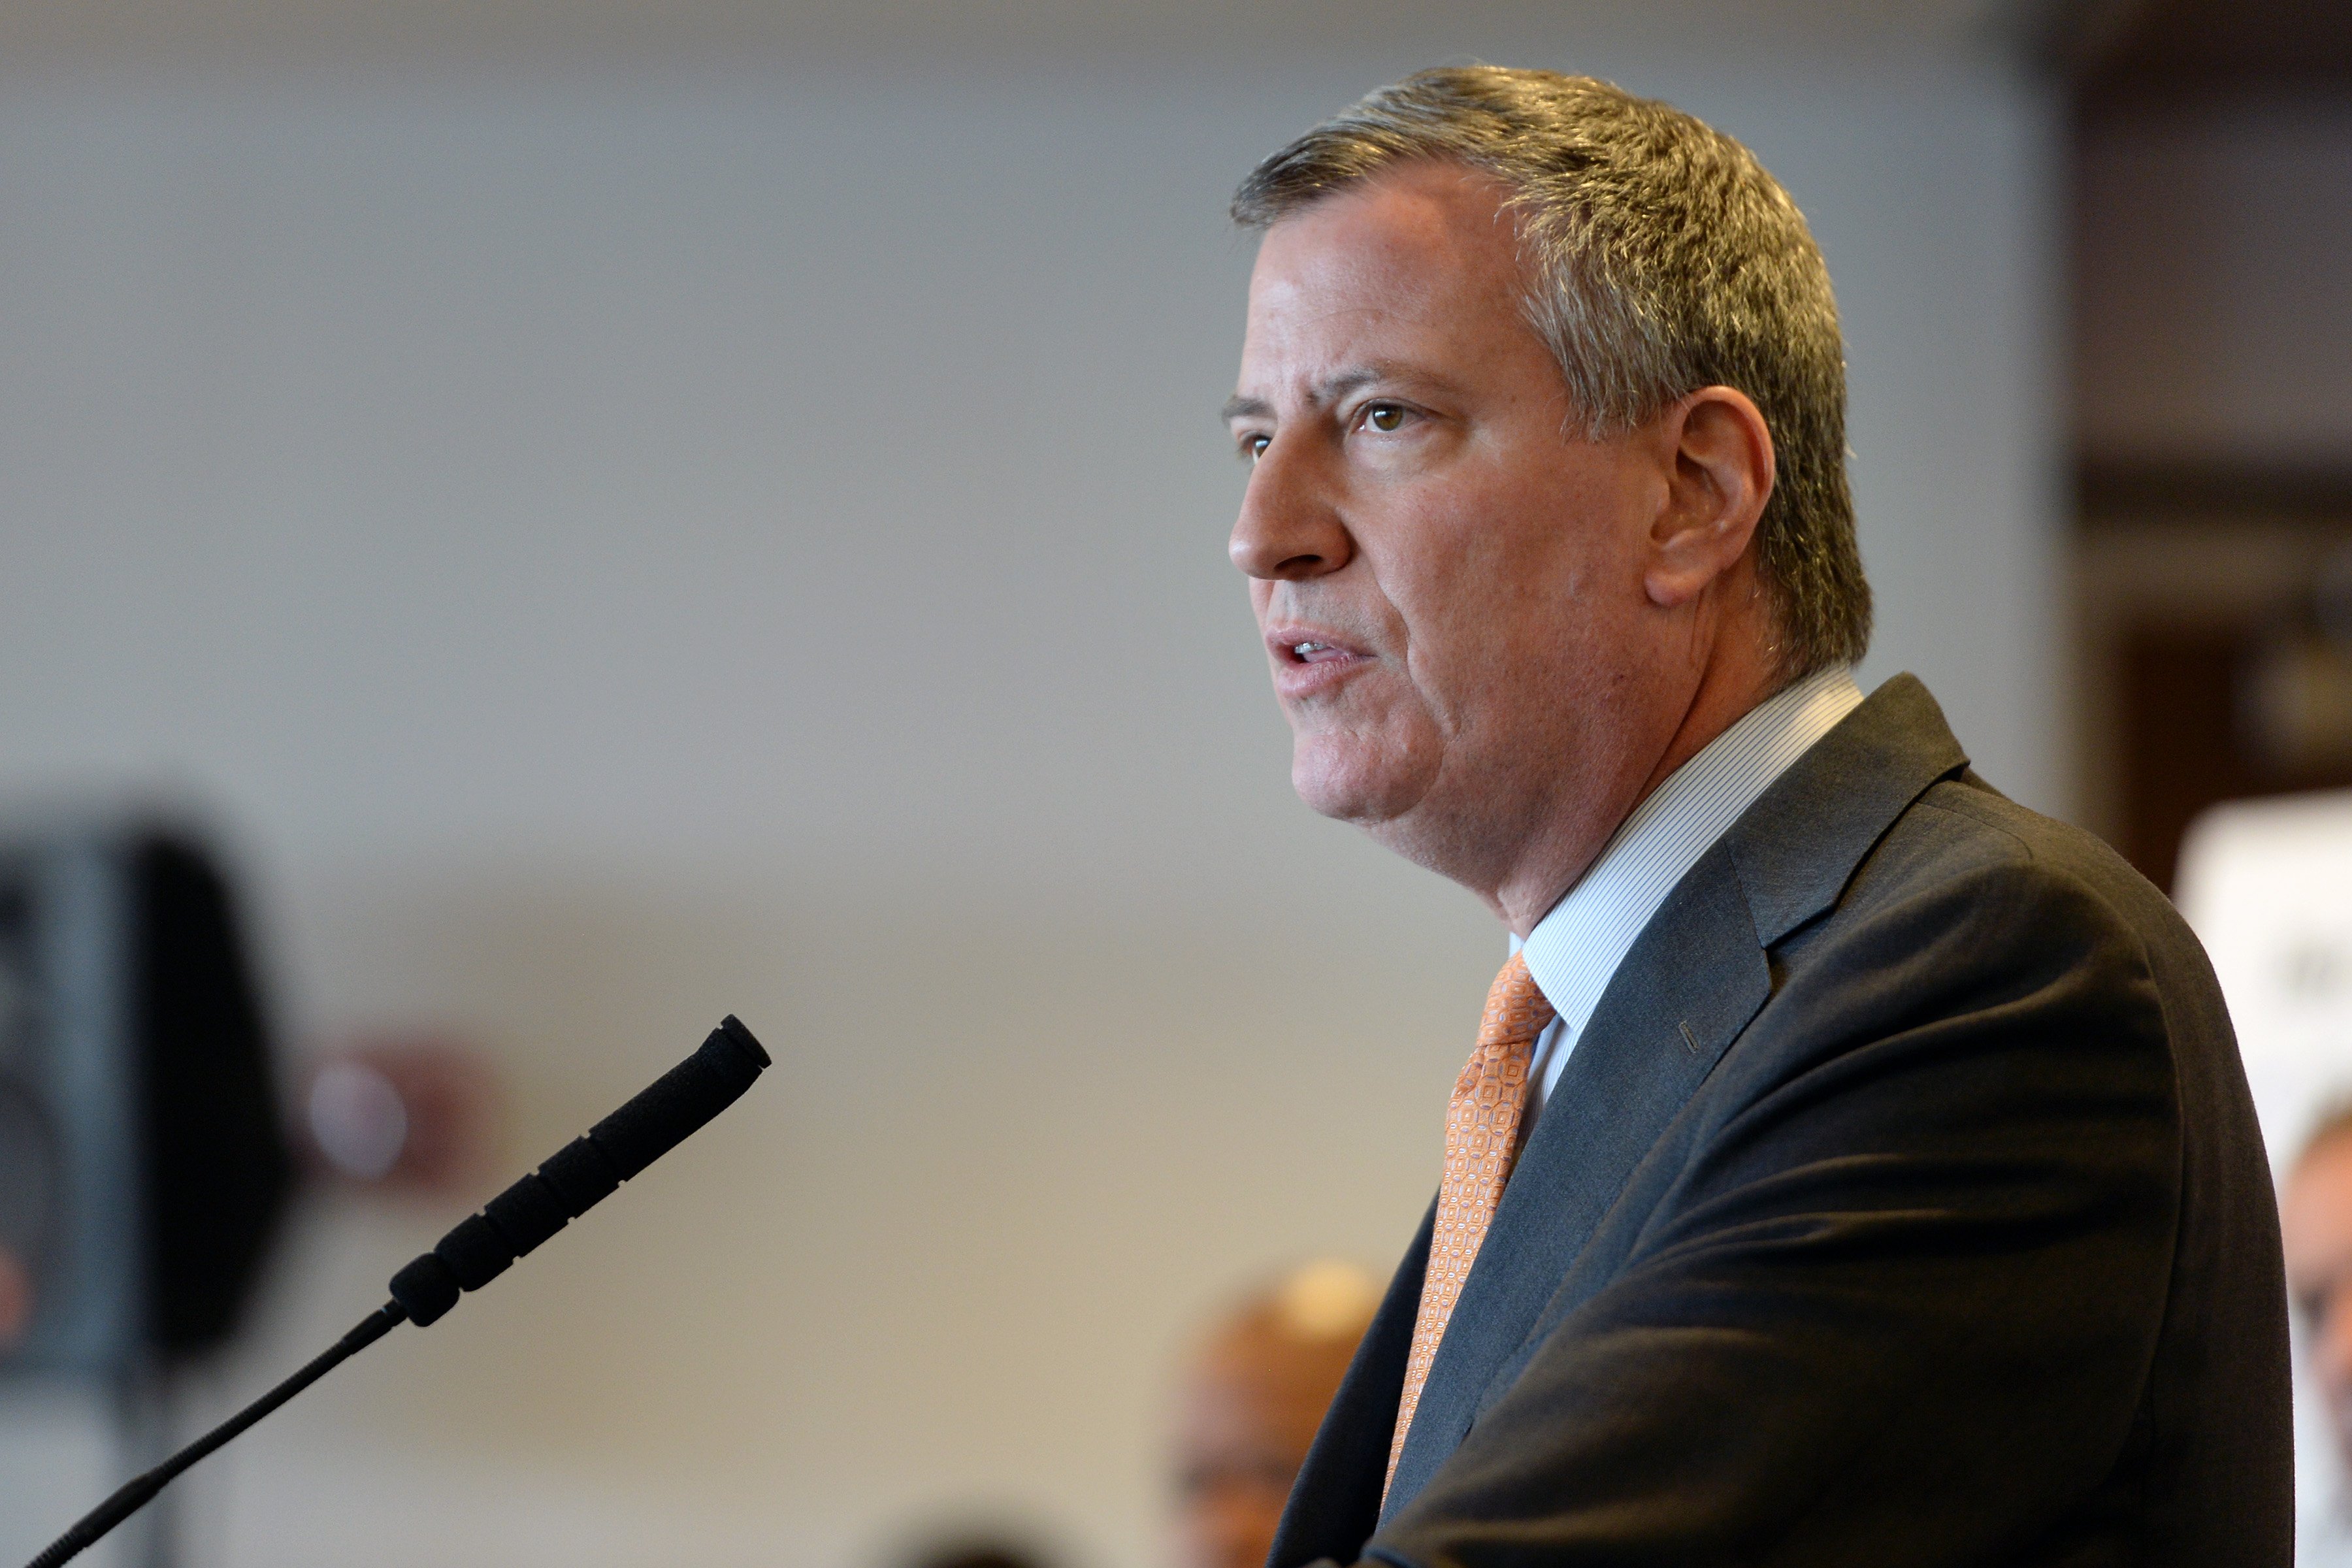 New York City Mayor Bill de Blasio holds a press conference to speak about new guidelines for NYPD officer retraining at the New York Police Academy in the Flushing section of Queens, New York, on Dec. 4, 2014.